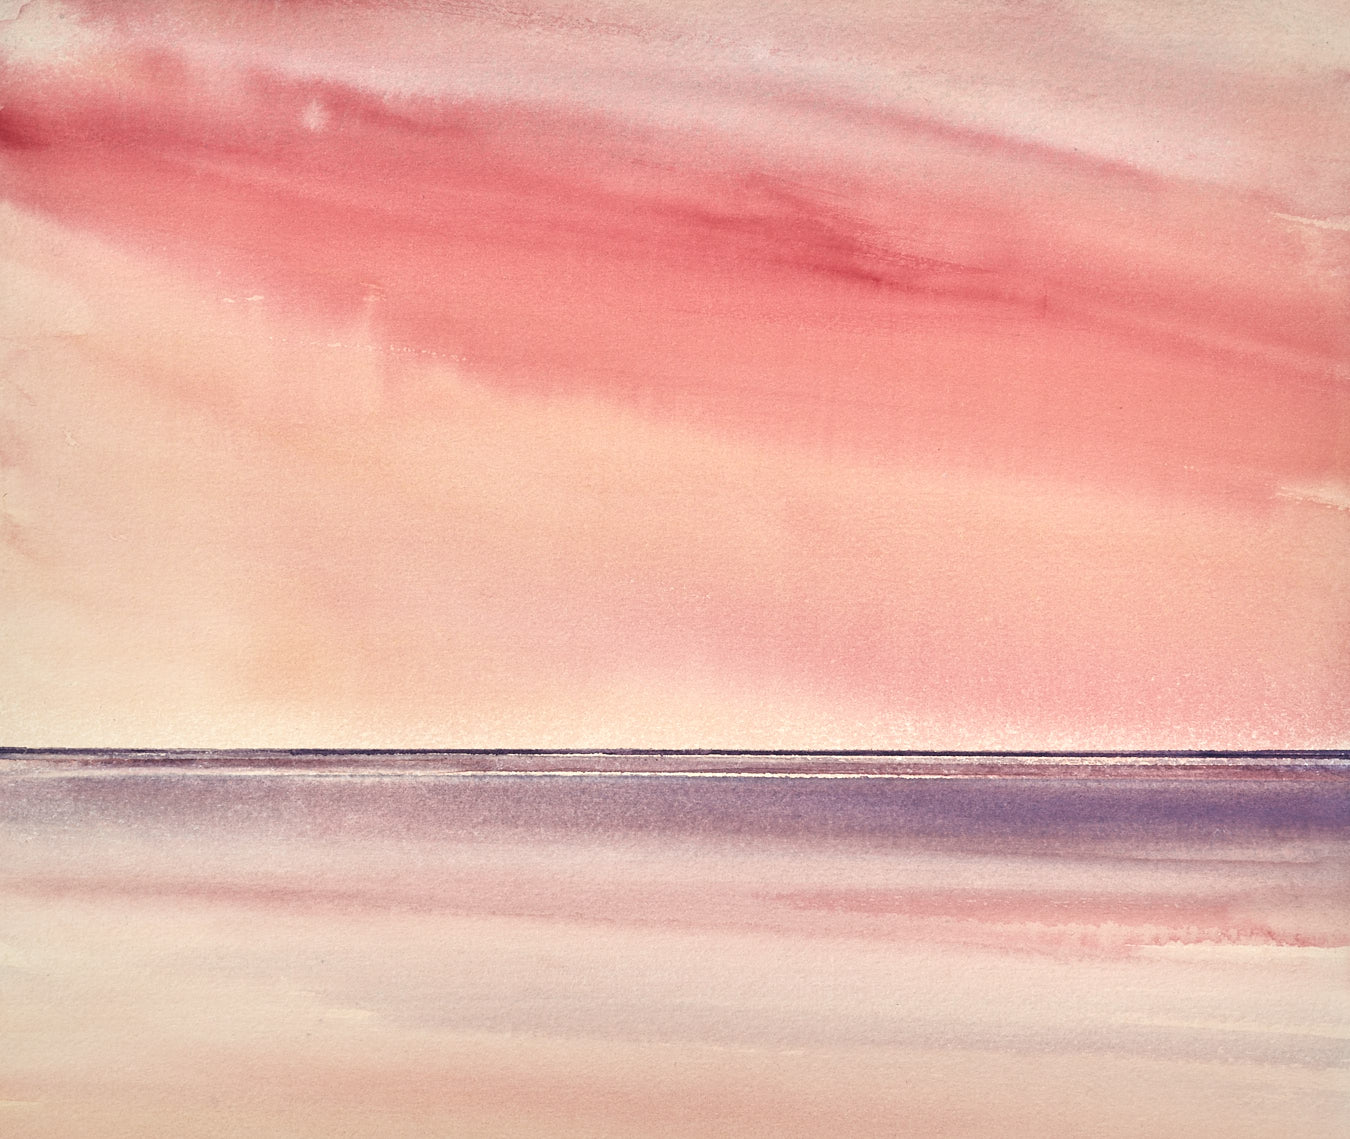 Large image of Twilight, Lytham St Annes beach original watercolour painting by Timothy Gent